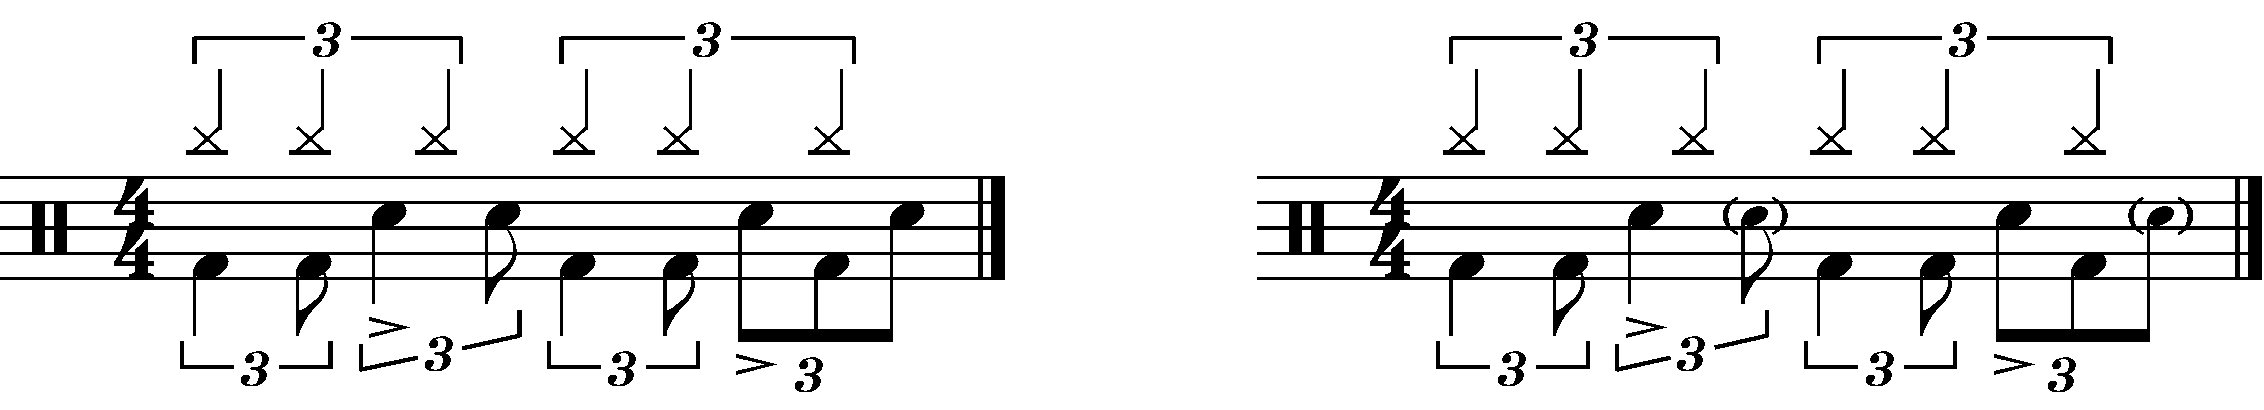 A groove based on a quarter note triplet